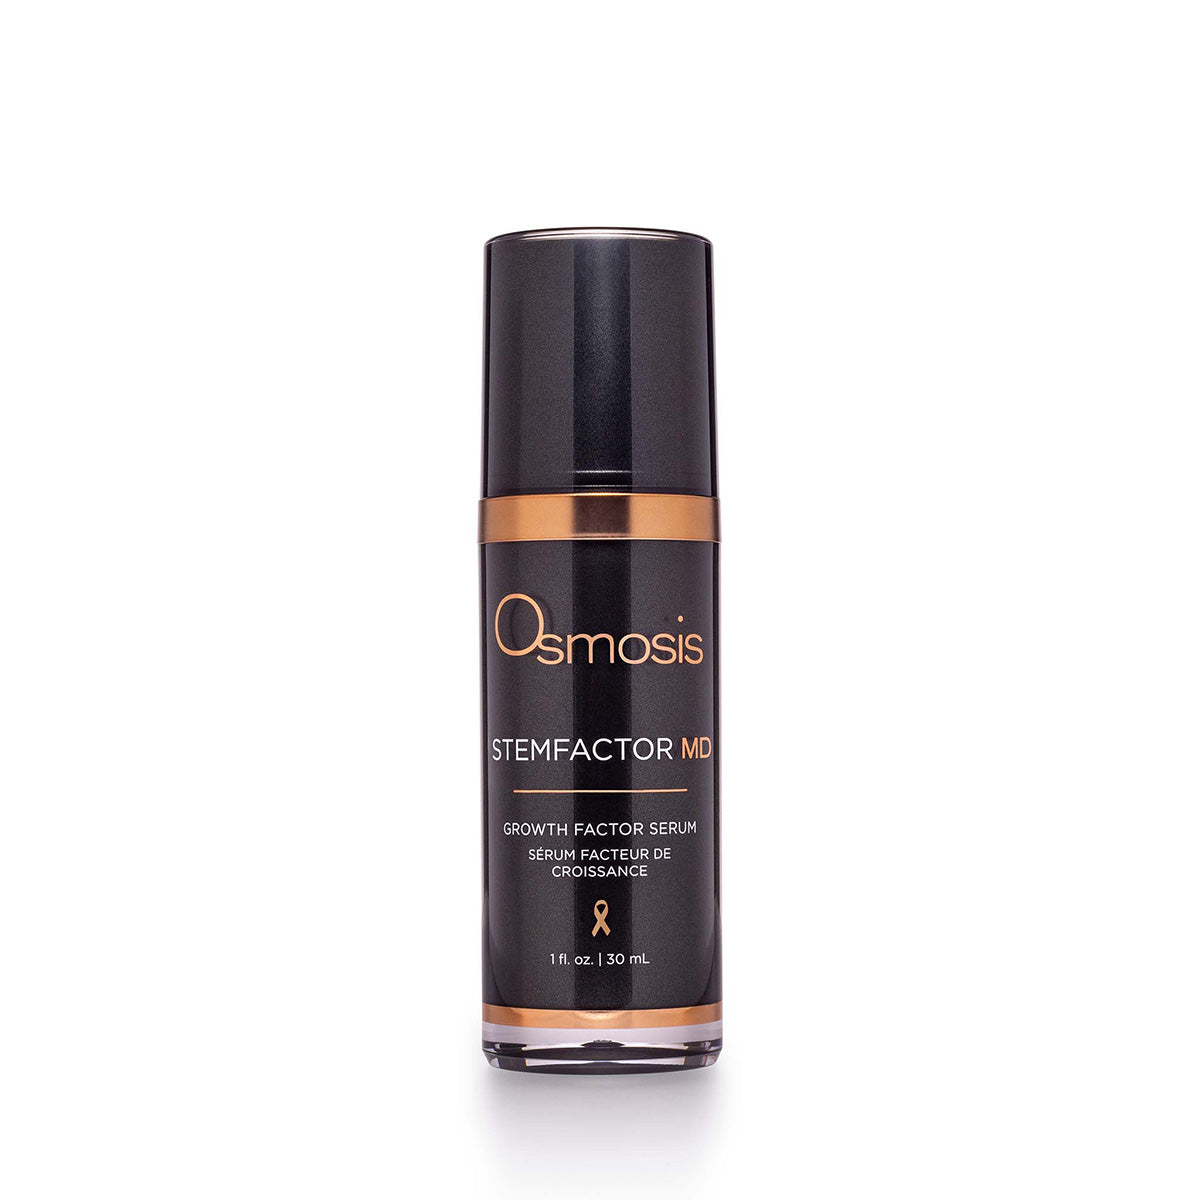 Osmosis Skincare Stemfactor MD Serum reverses aging by stimulating new cells and collagen for radiant skin.